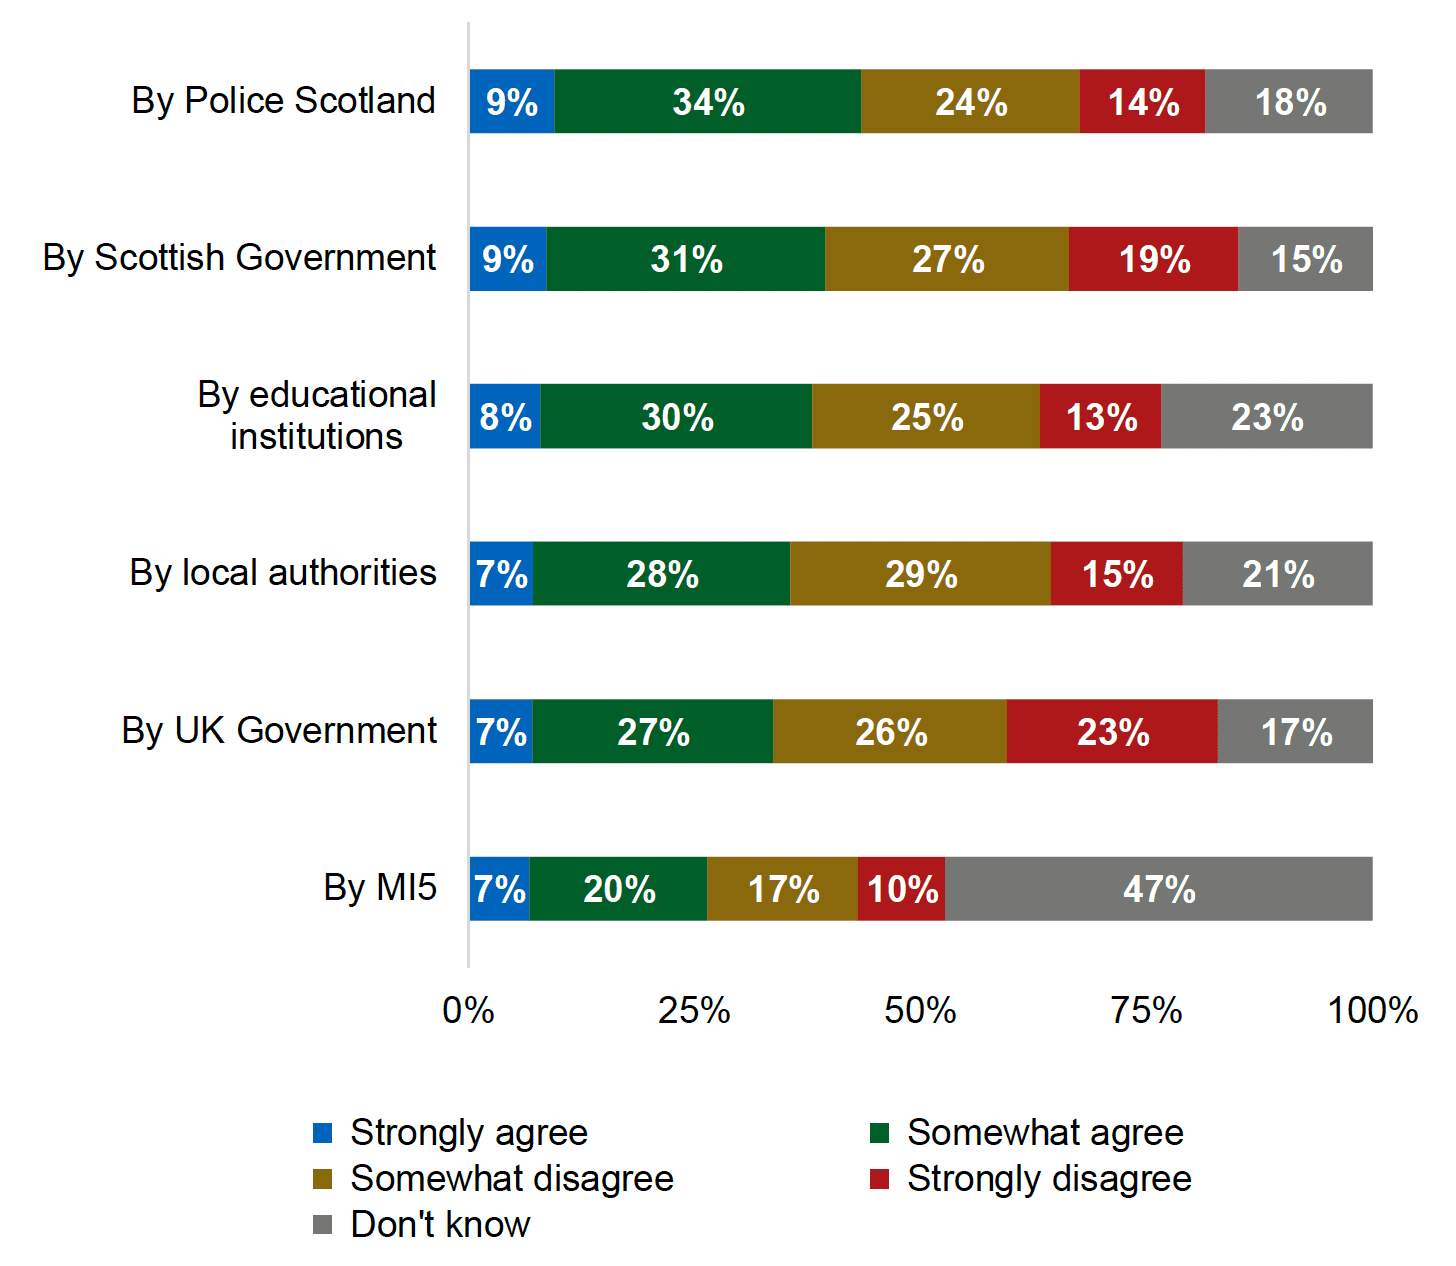 A stacked bar chart showing agreement or disagreement that the following six institutions are doing enough to tackle extremism in Scotland: Local authorities, educational institutions, Scottish Government, UK Government, Police Scotland, and MI5. The results are discussed in the main body of the text. 